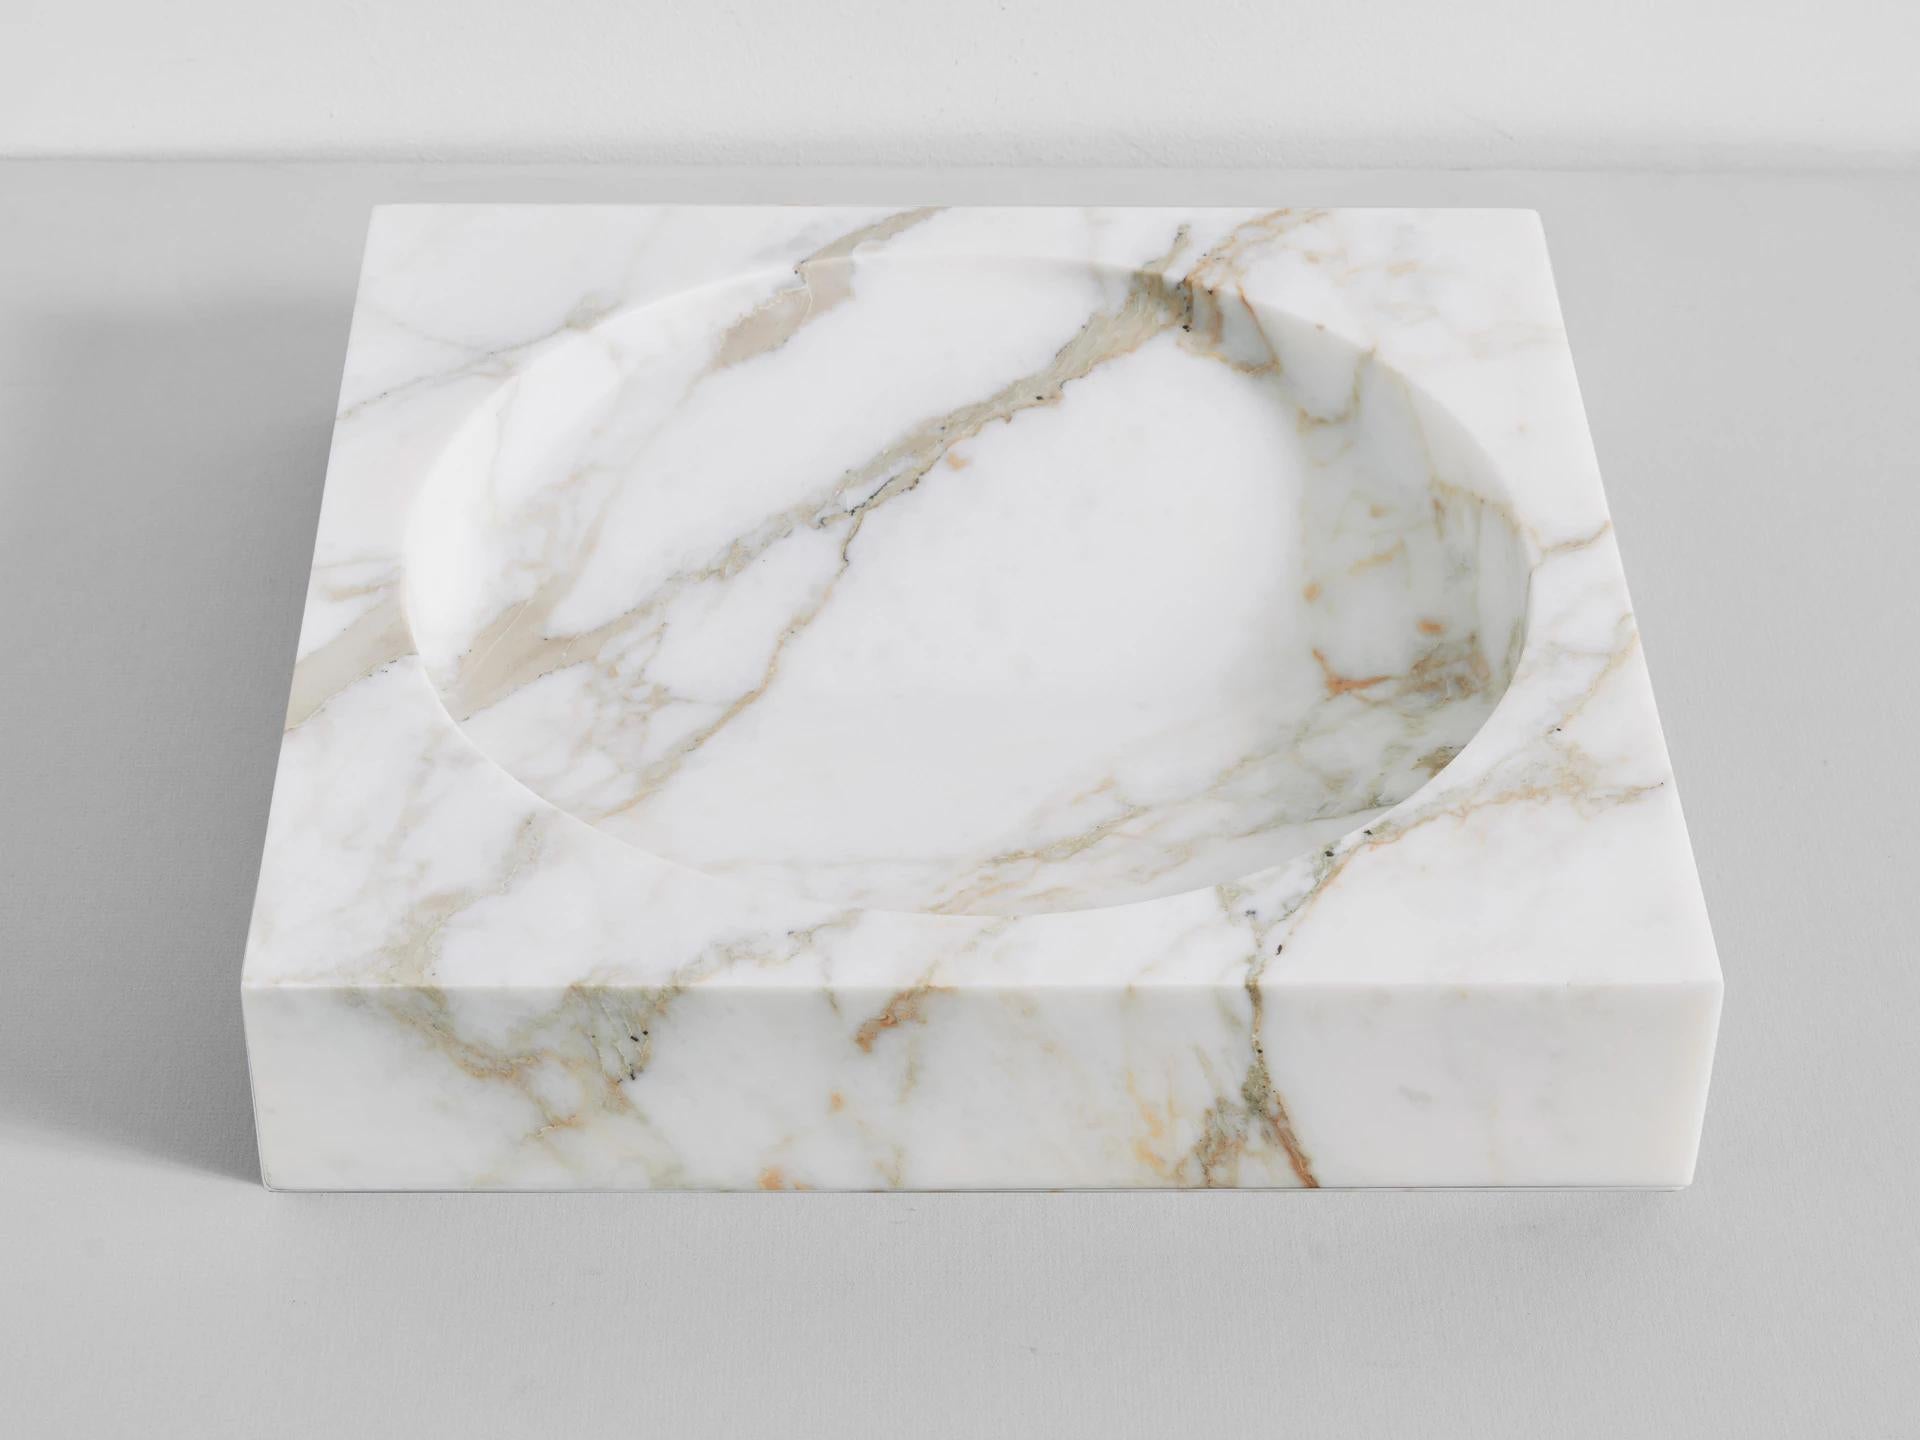 Marble vide Poche by Henry Wilson
This sculptural item is handmade in Sydney Australia.

Each piece is manufactured in natural stone, meaning variations of the pattern in the stone will occur from piece to piece. Has a honed finish.

The block